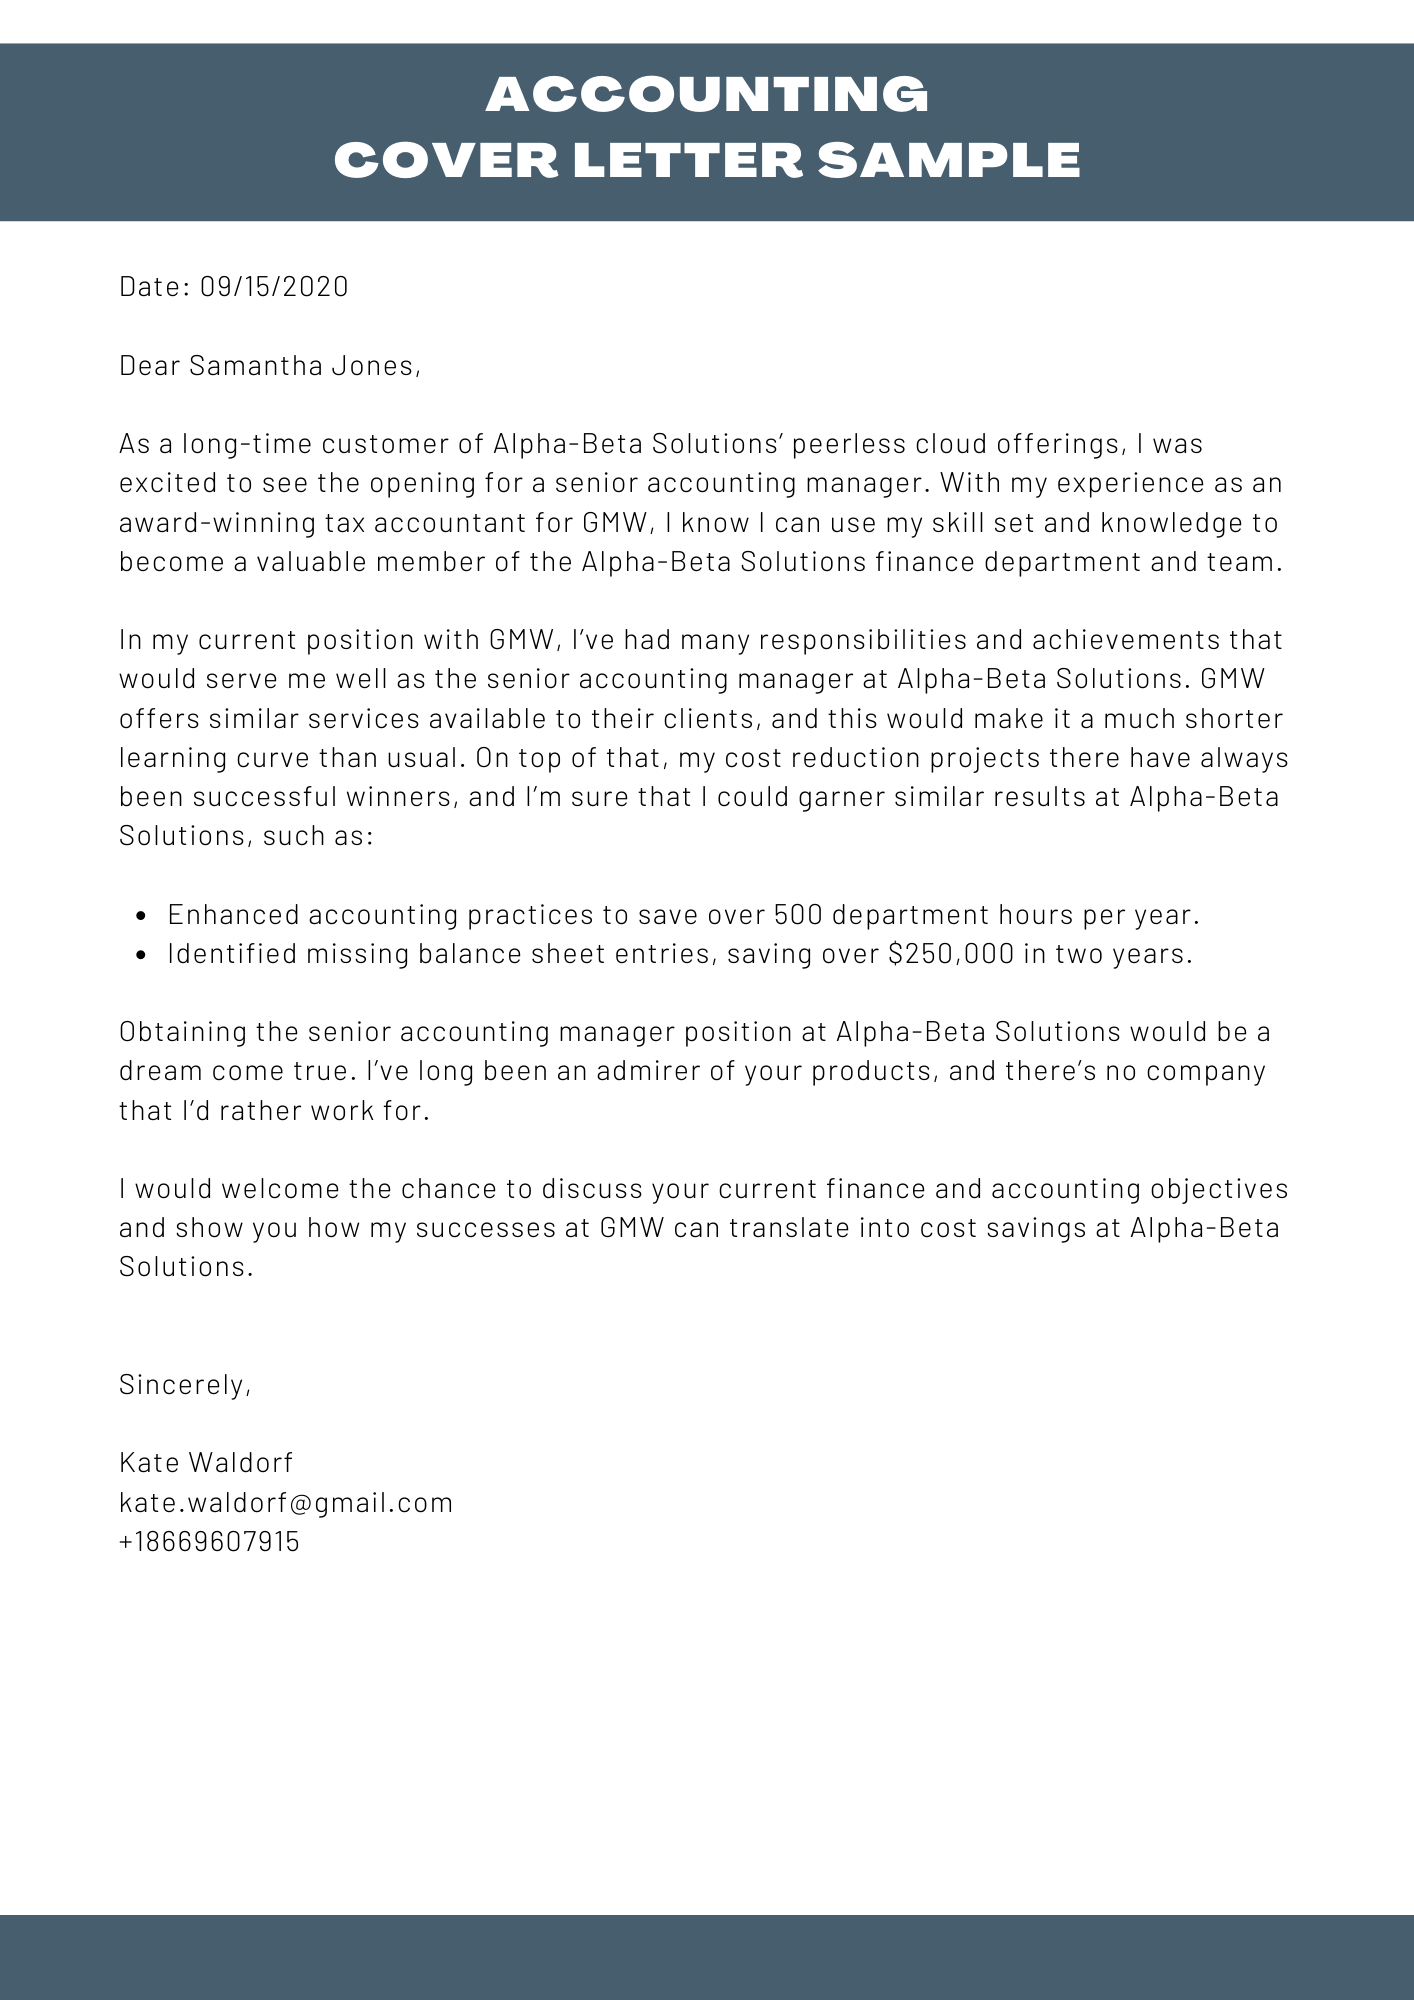 Accounting cover letter sample